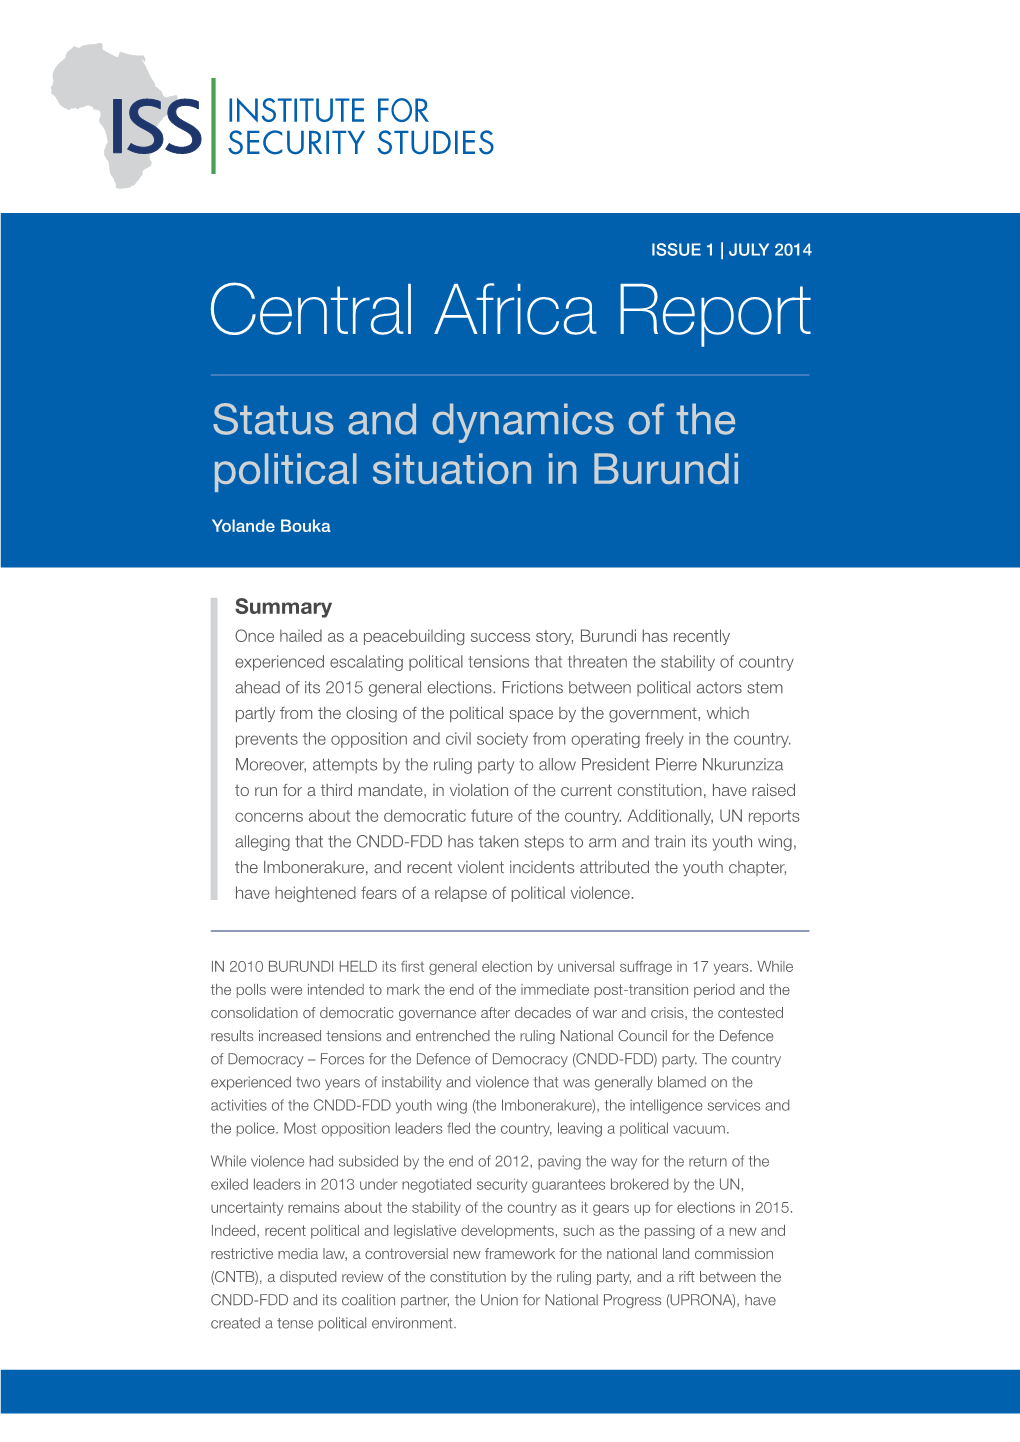 Central Africa Report